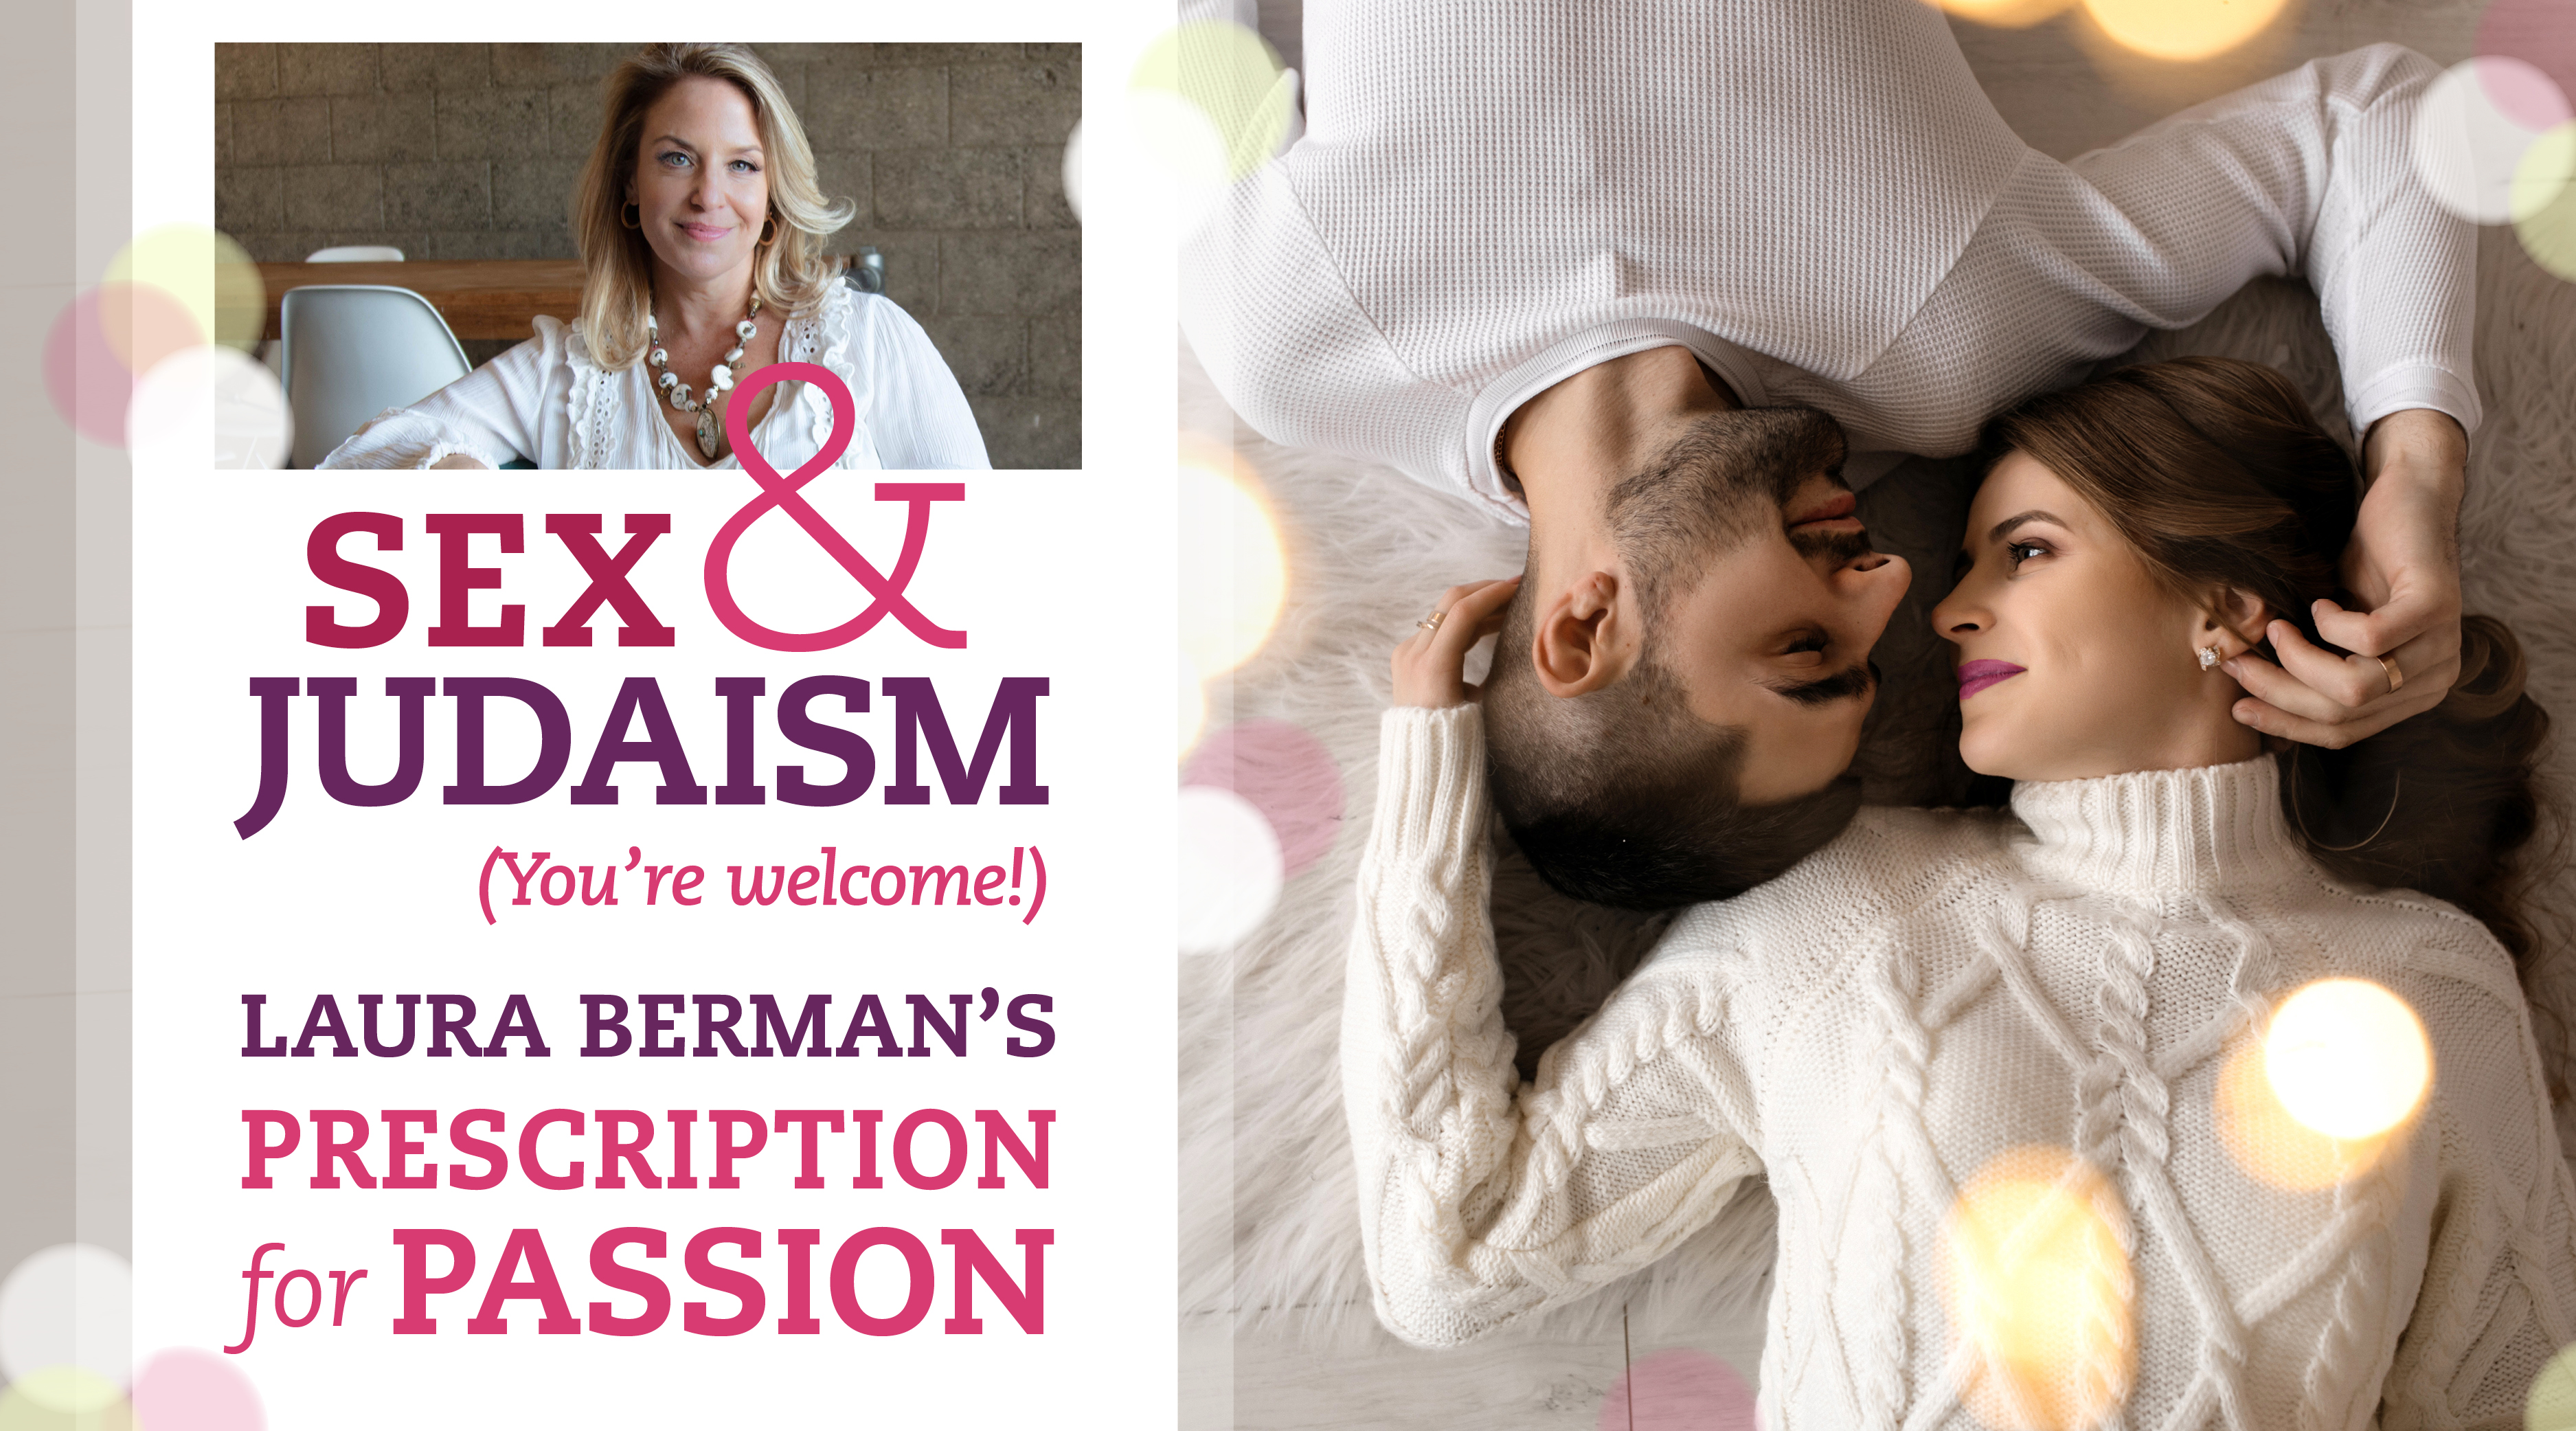 Sex And Judaism You Re Welcome Laura Berman S Prescription For Passion American Jewish